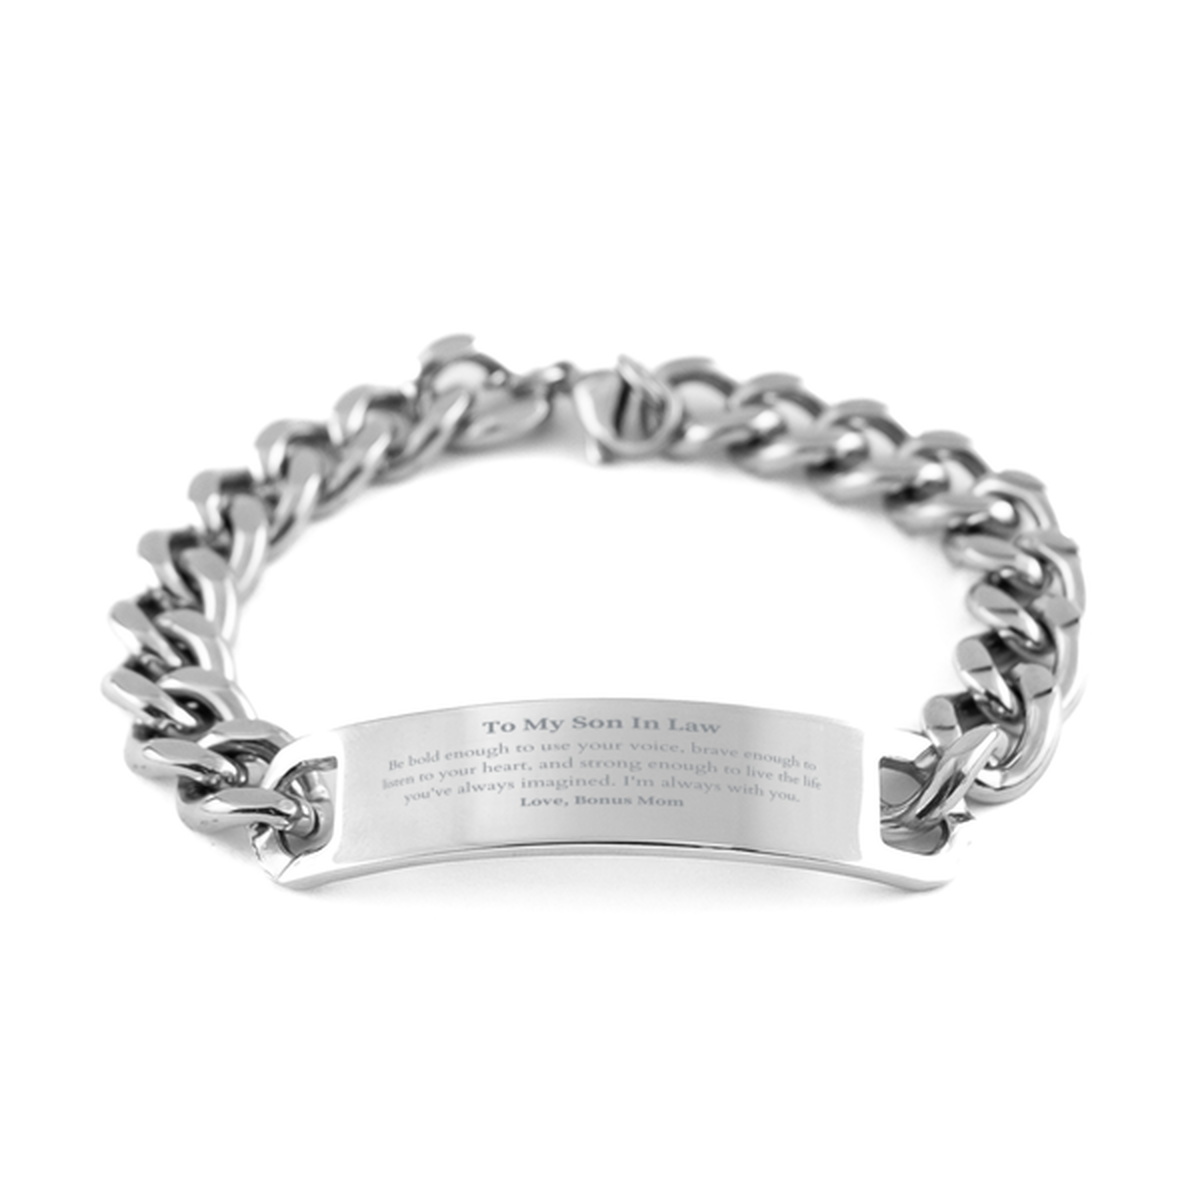 Keepsake Son In Law Cuban Chain Stainless Steel Bracelet Gift Idea Graduation Christmas Birthday Son In Law from Bonus Mom, Son In Law Be bold enough to use your voice, brave enough to listen to your heart. Love, Bonus Mom